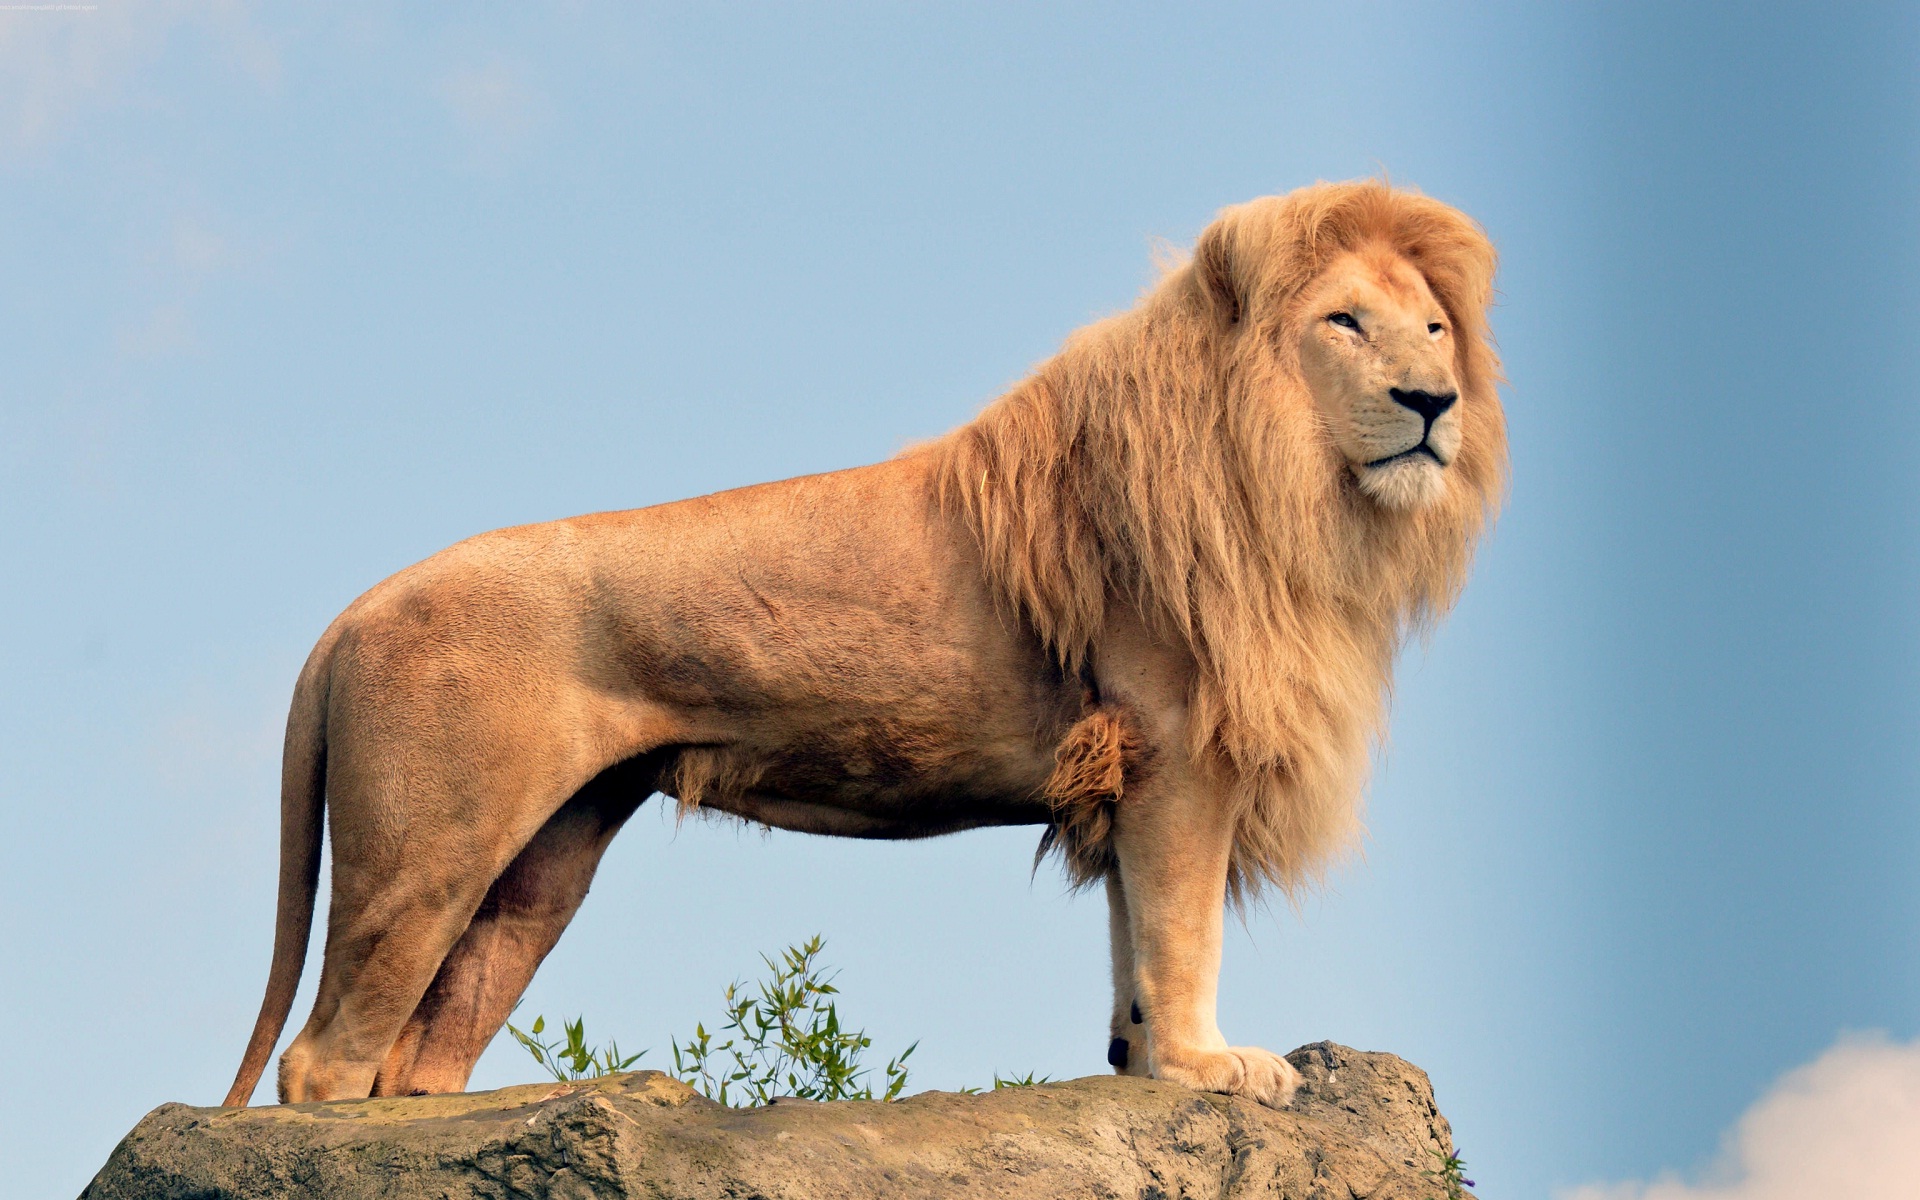 Real king of forest lion wonderful photographs | HD Wallpapers Rocks